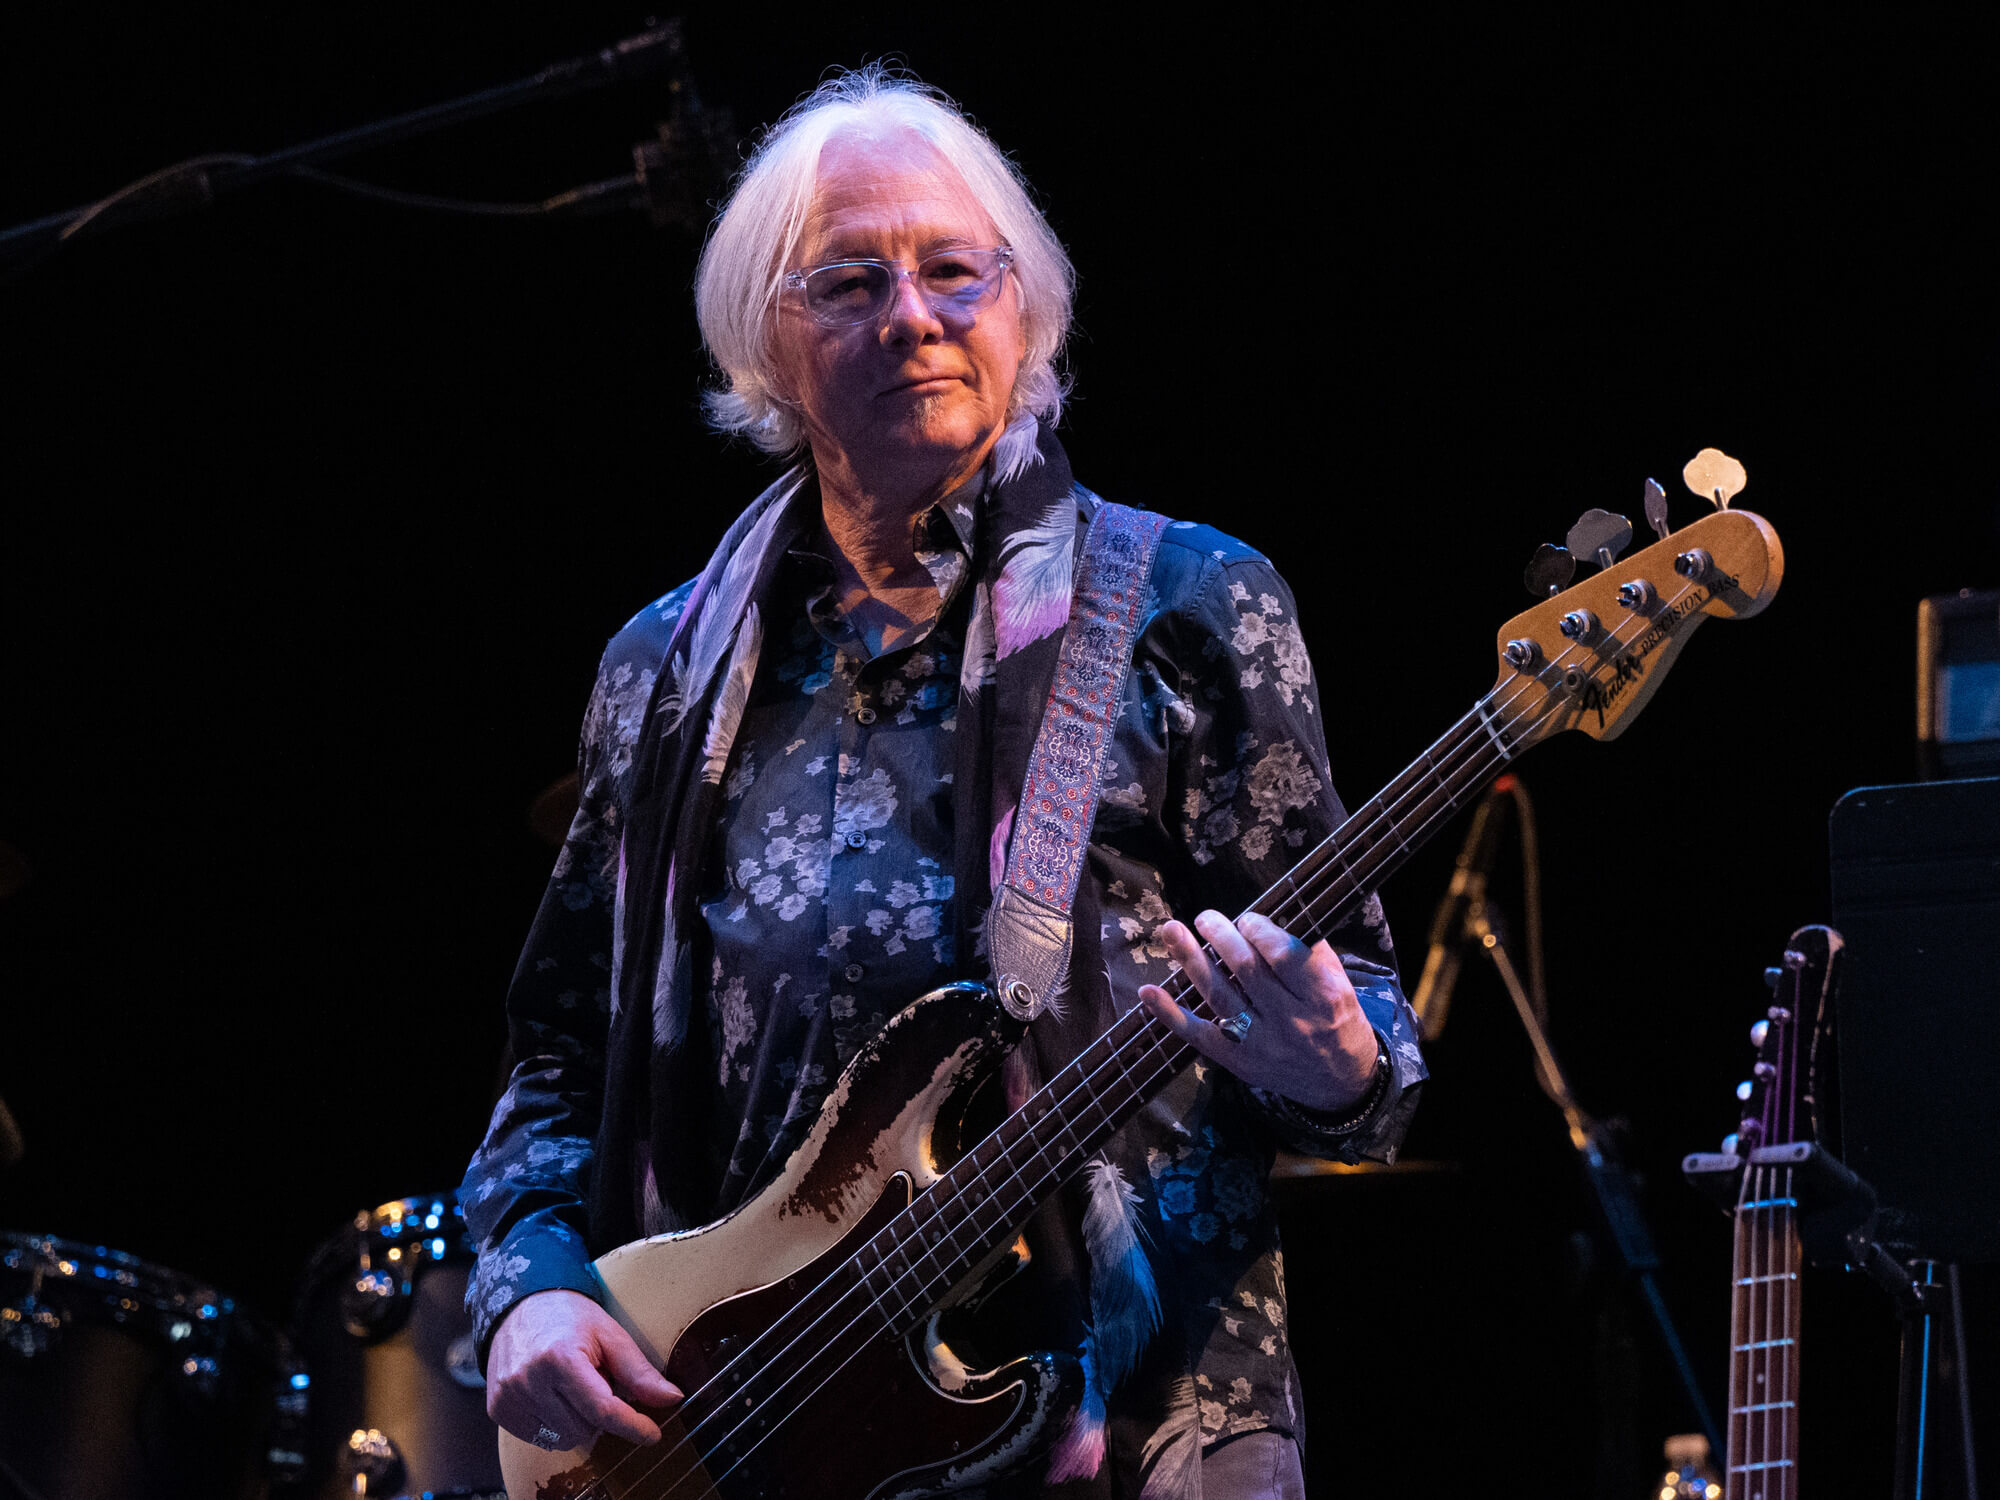 Mike Mills of R.E.M. performing on stage